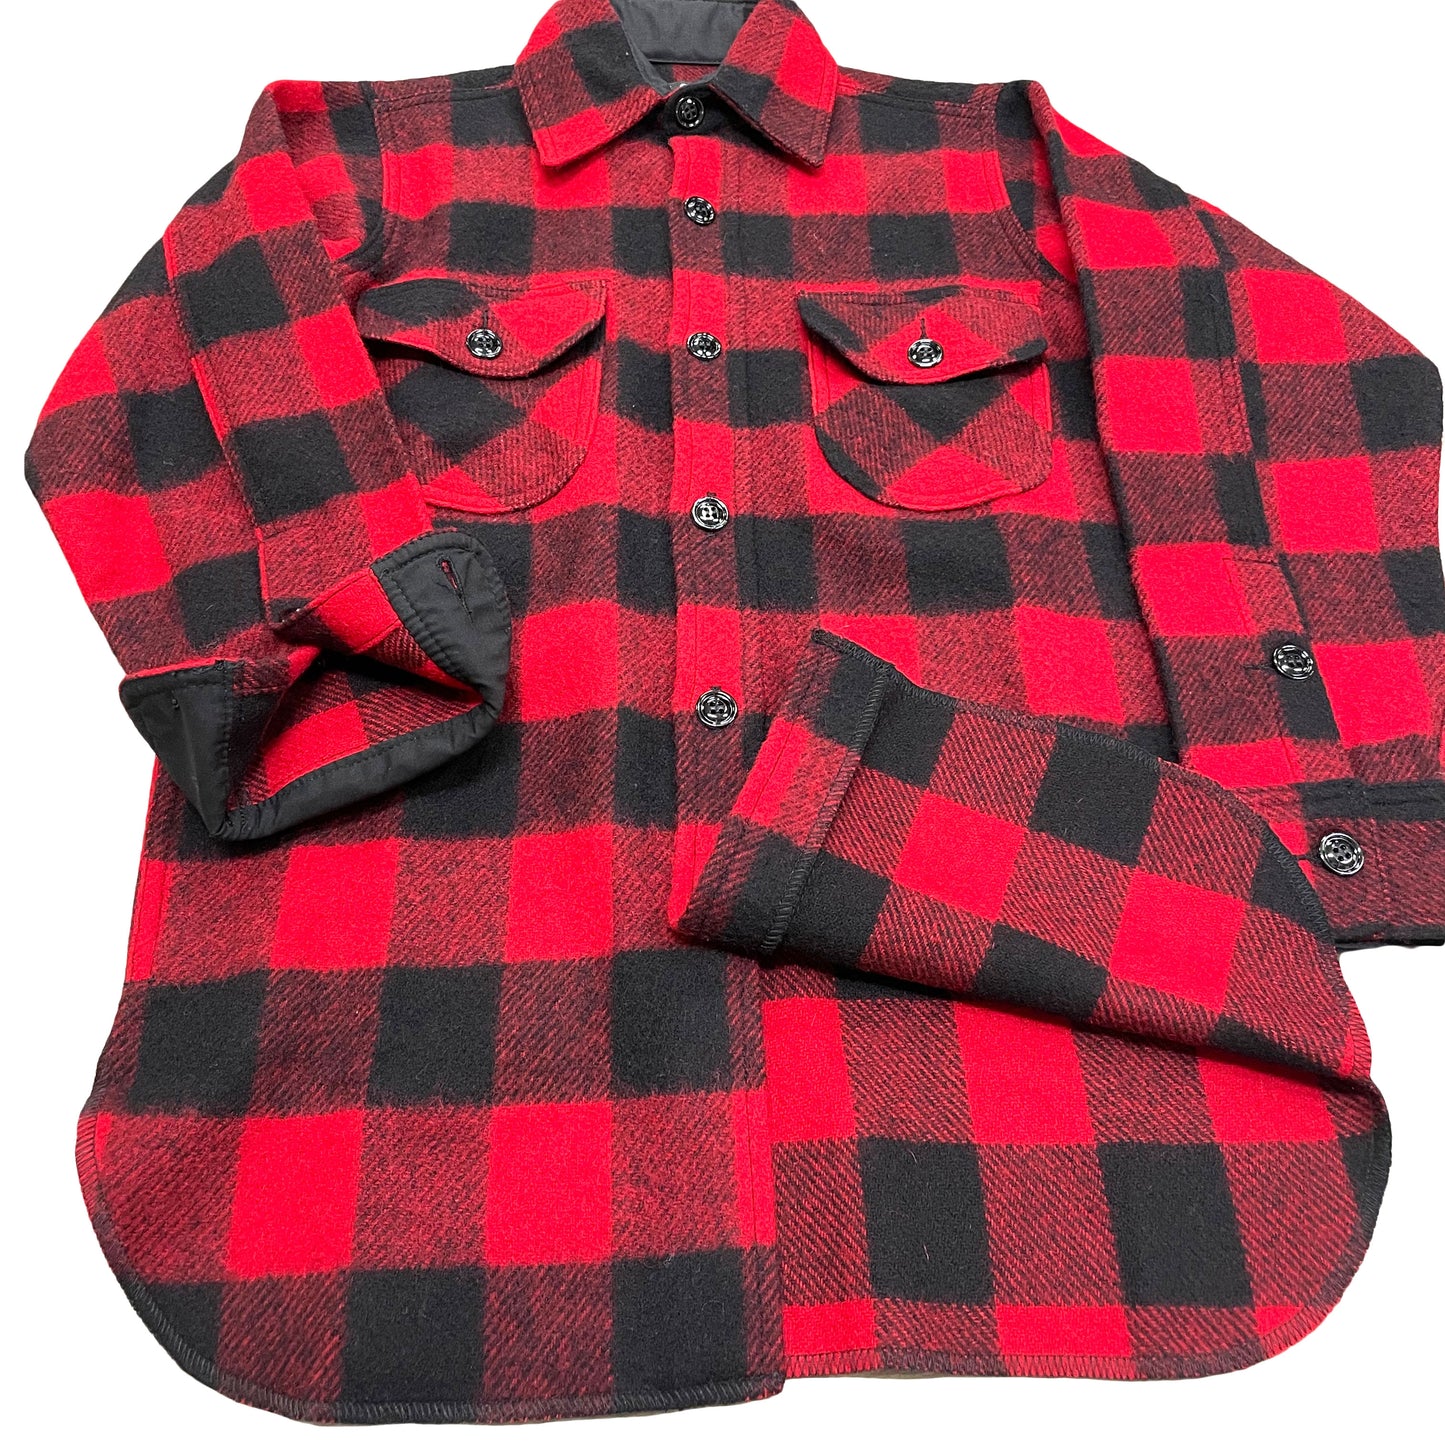 Red and black buffalo check wool Long tail button down shirt cuff detail